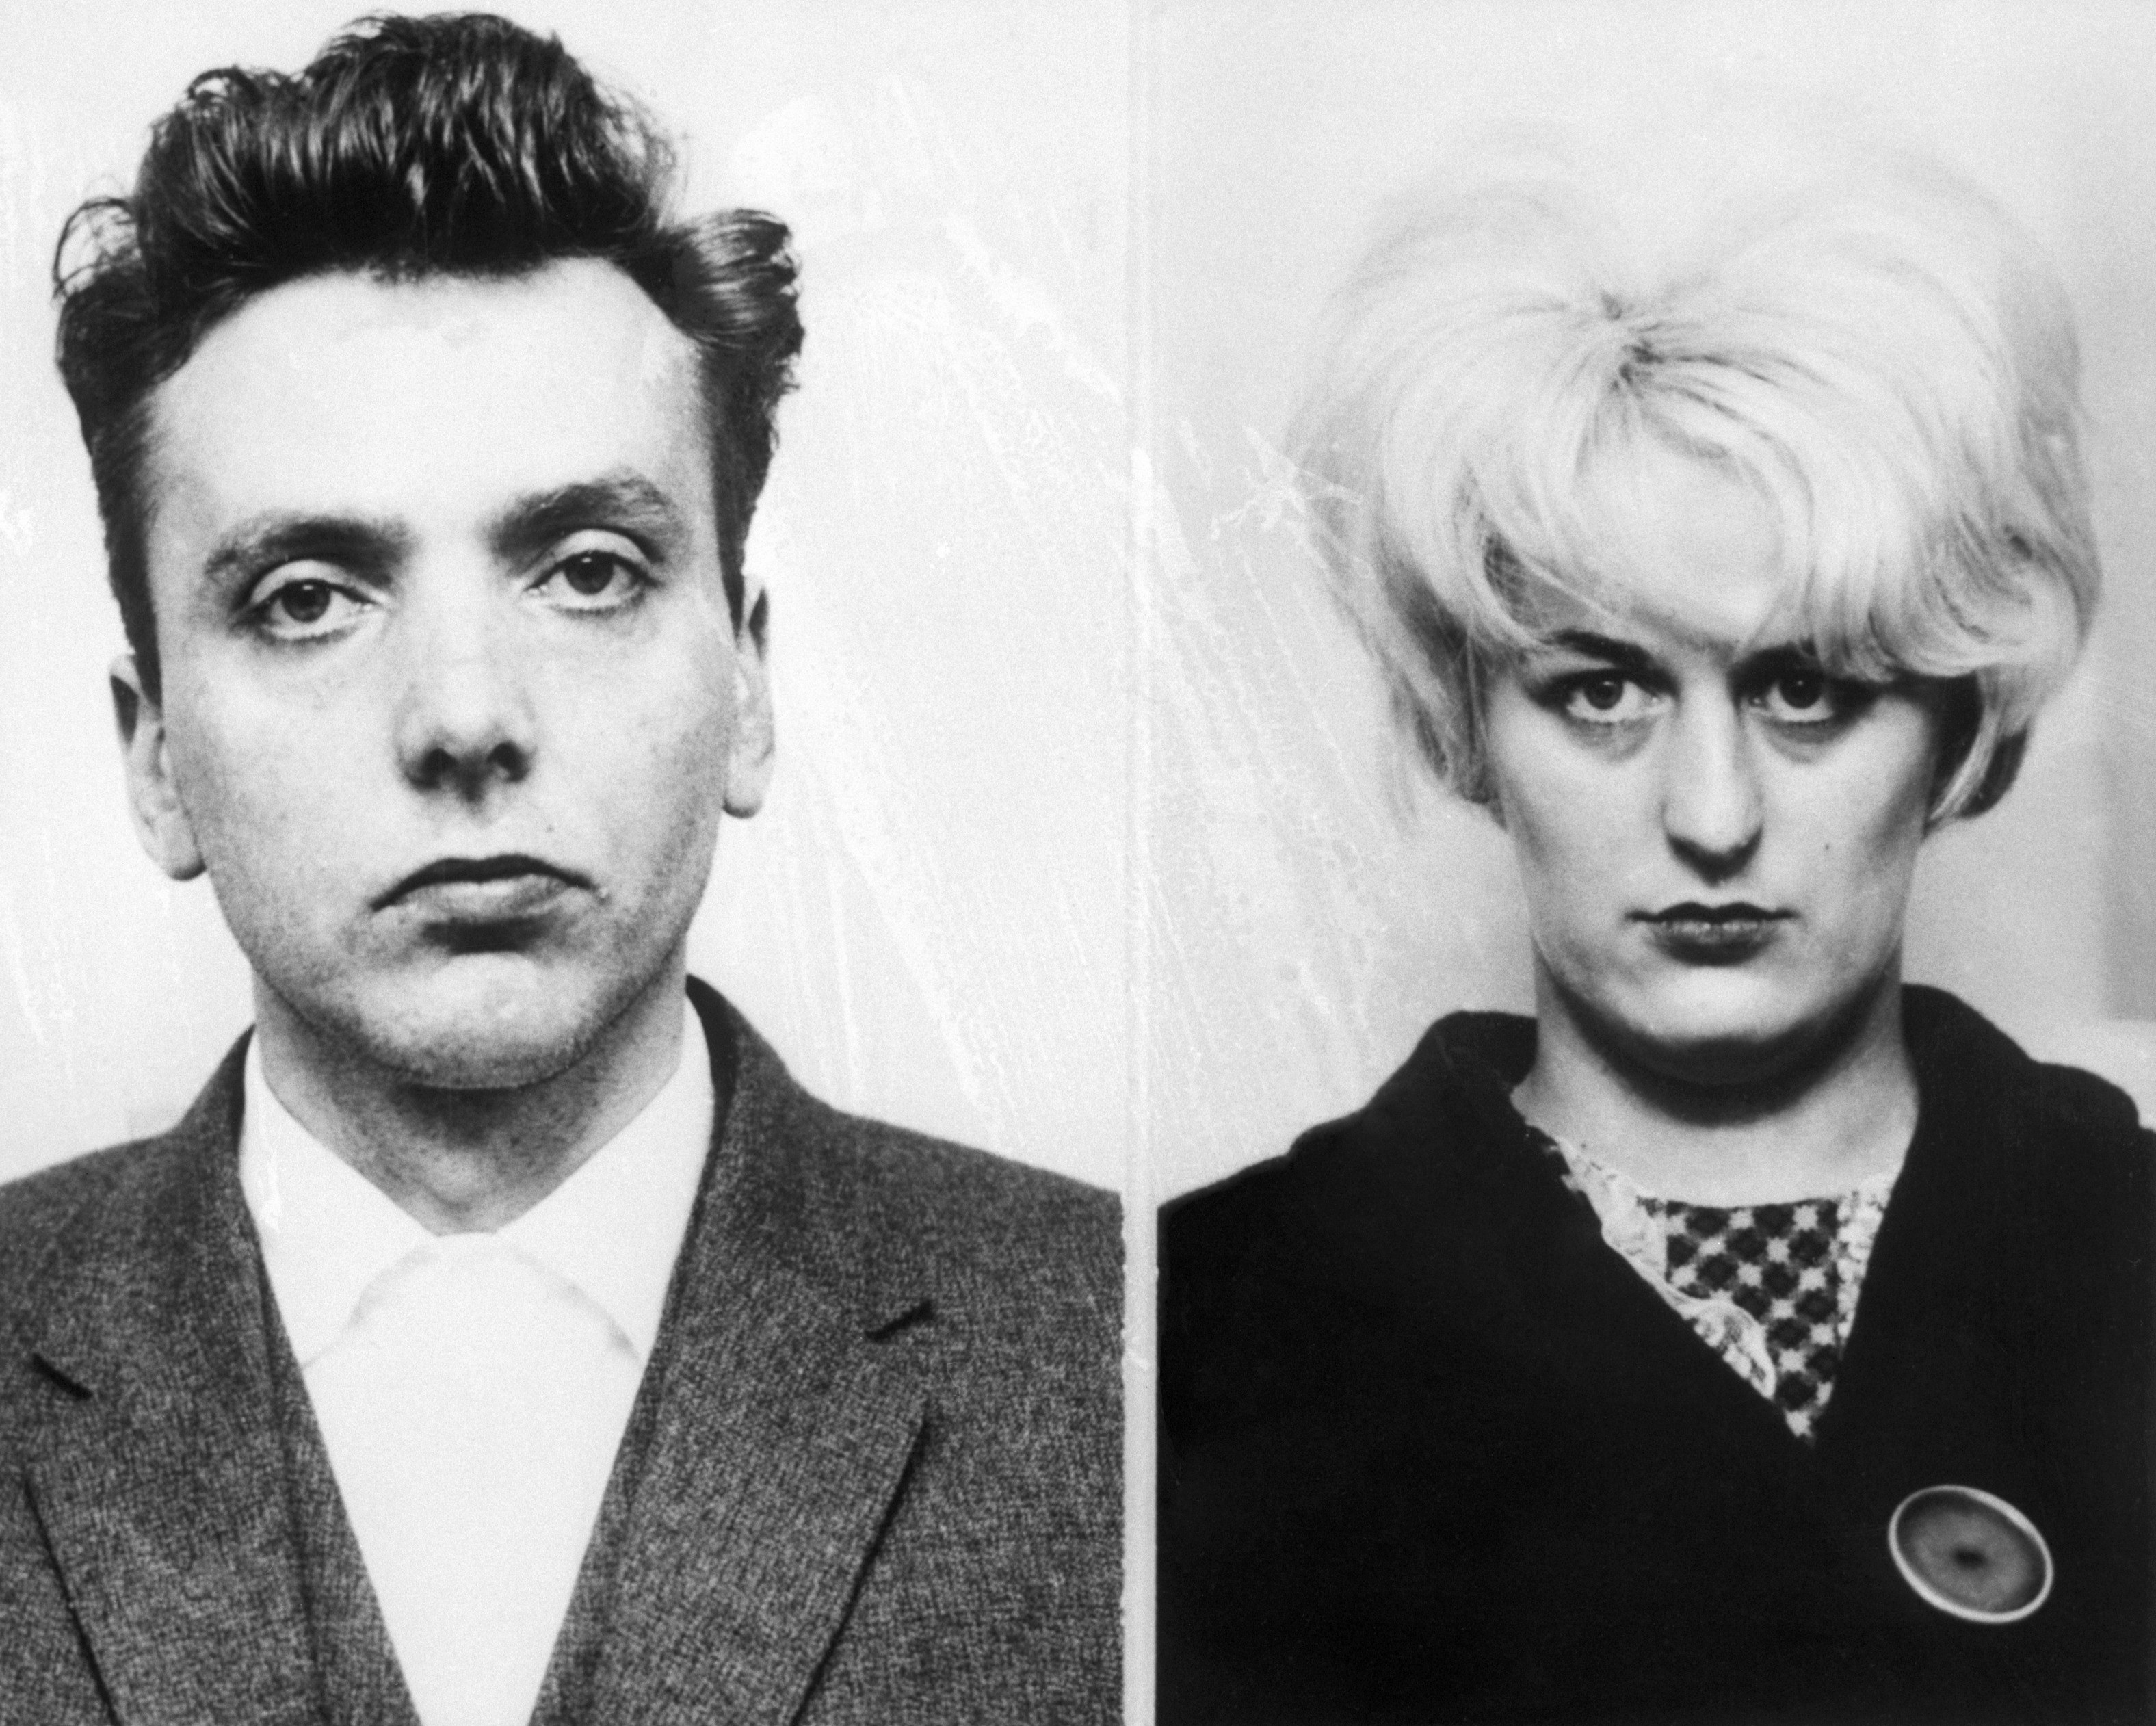 England, UK --- Original caption: CHESTER, ENGLAND-05/06/66-: Ian Brady (left) and his blonde mistress, Myra Hindley, were found guilty May 6 here of murder, in the sensational "Bodies of the Moor" trial. Both were sentenced to life imprisonment. --- Image by © Bettmann/CORBIS